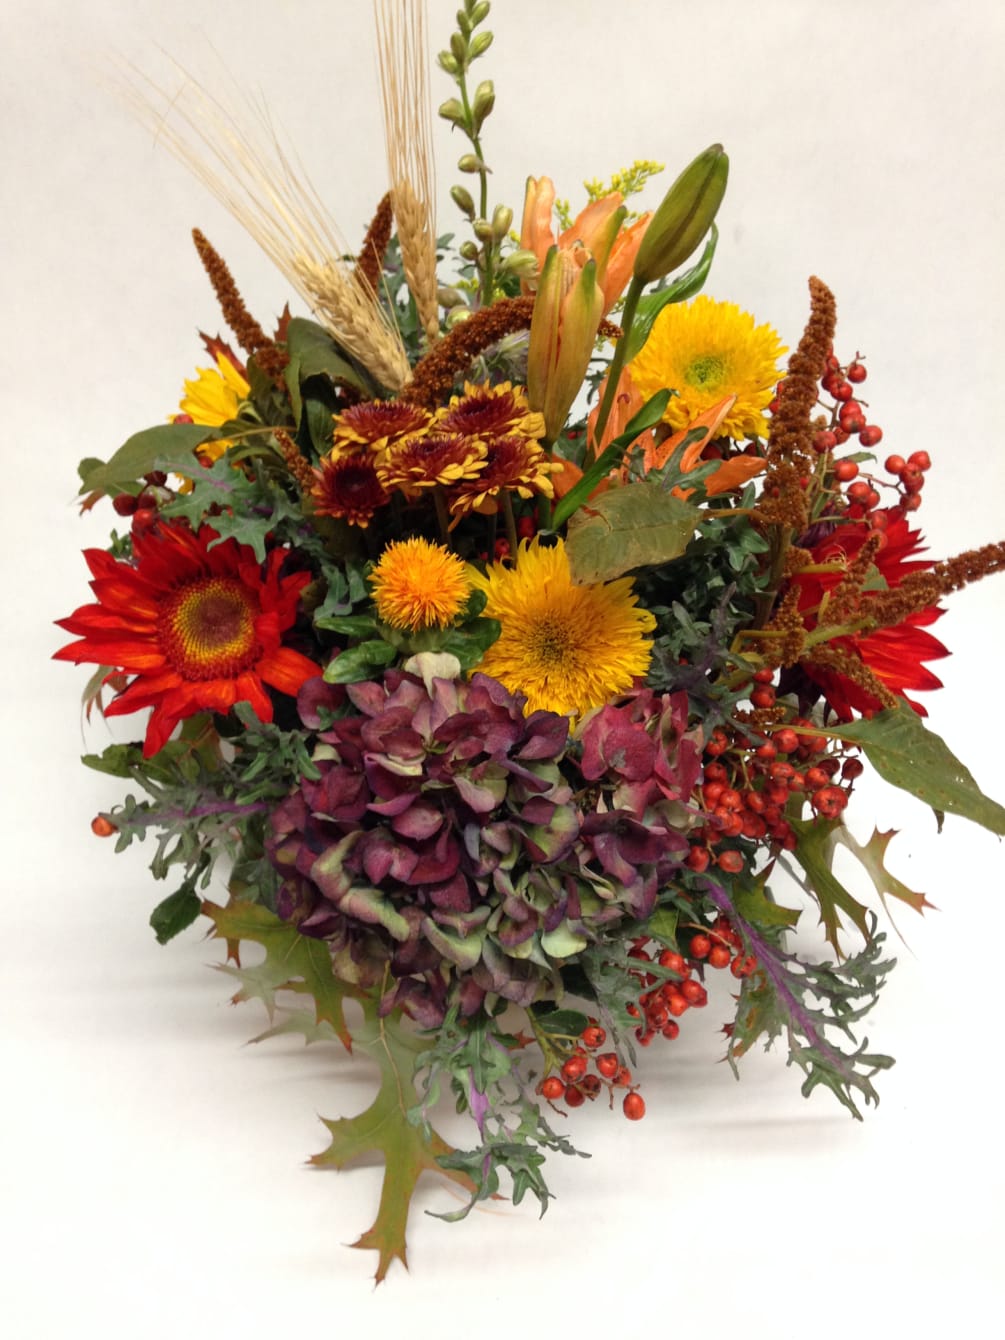 This autumnal inspired arrangement comes complete with mums, sunflowers, asiatic lilies, hydrangeas